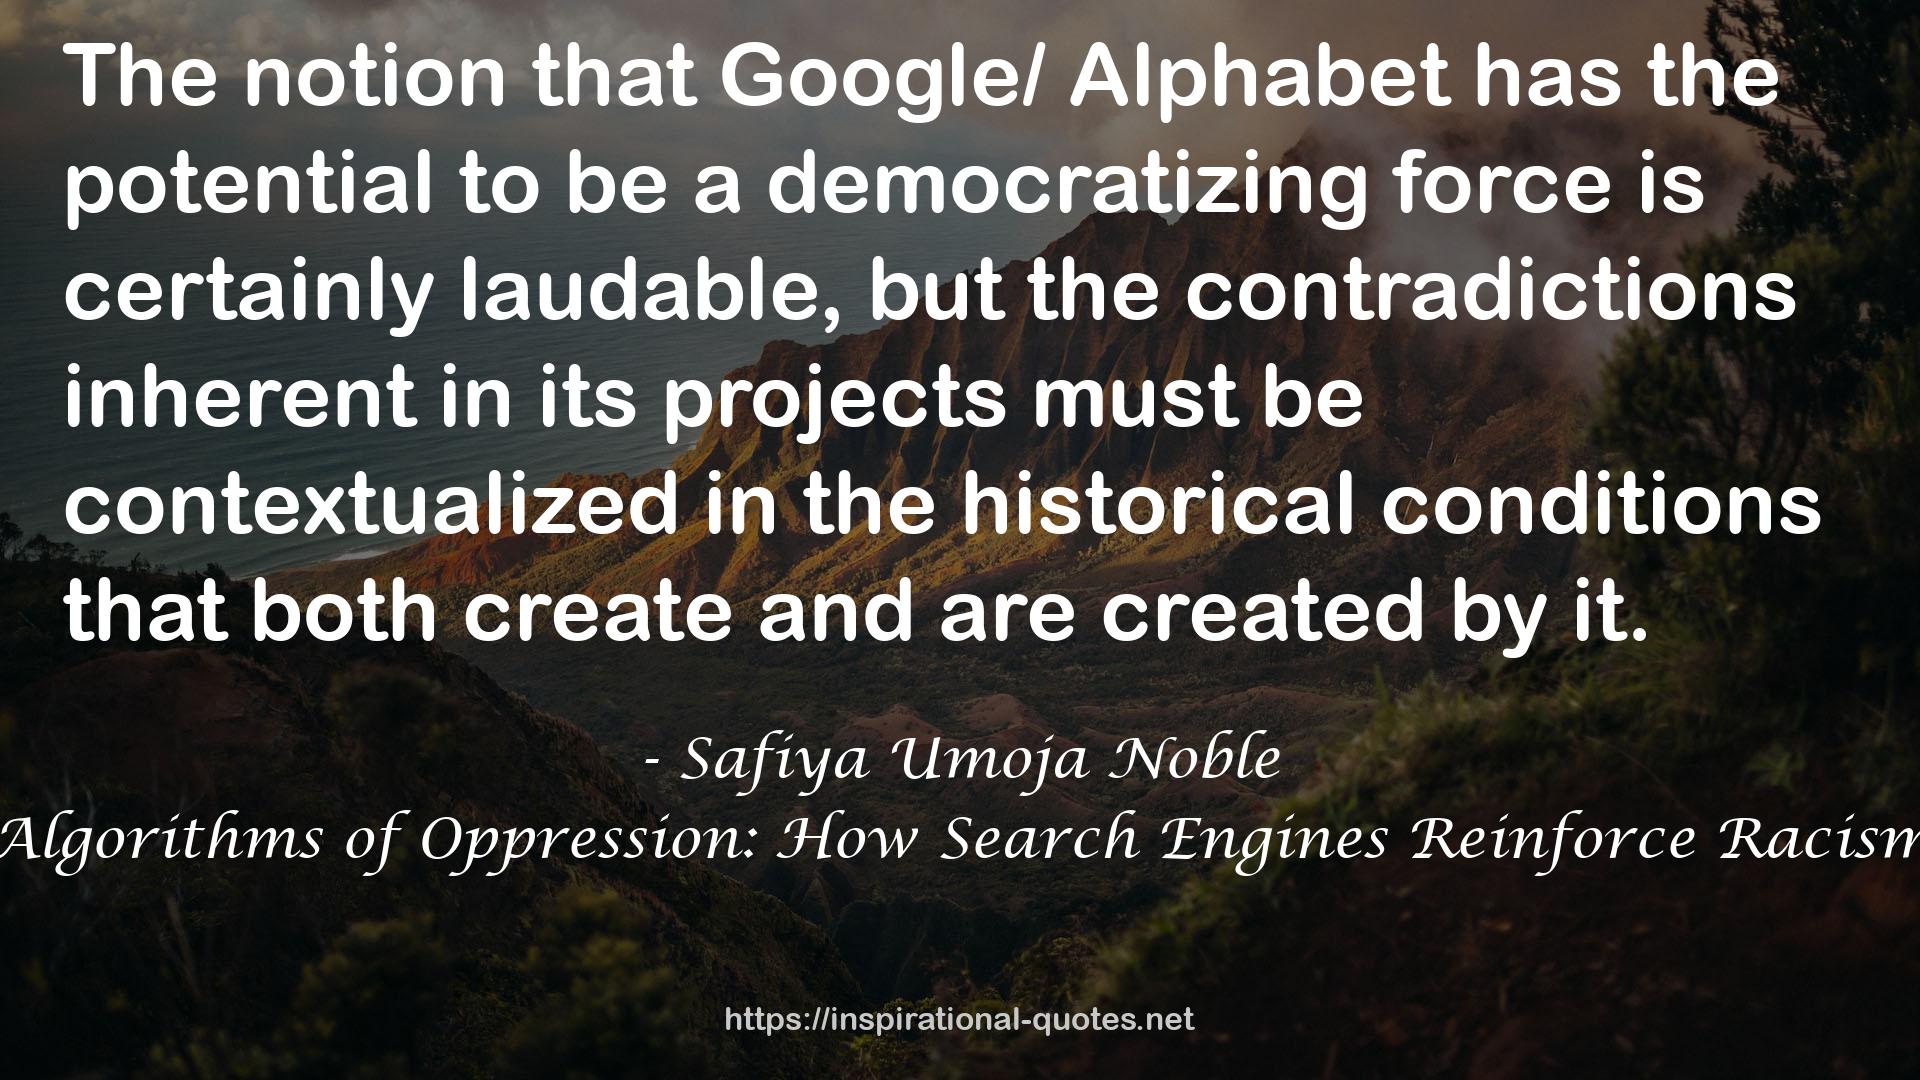 Algorithms of Oppression: How Search Engines Reinforce Racism QUOTES